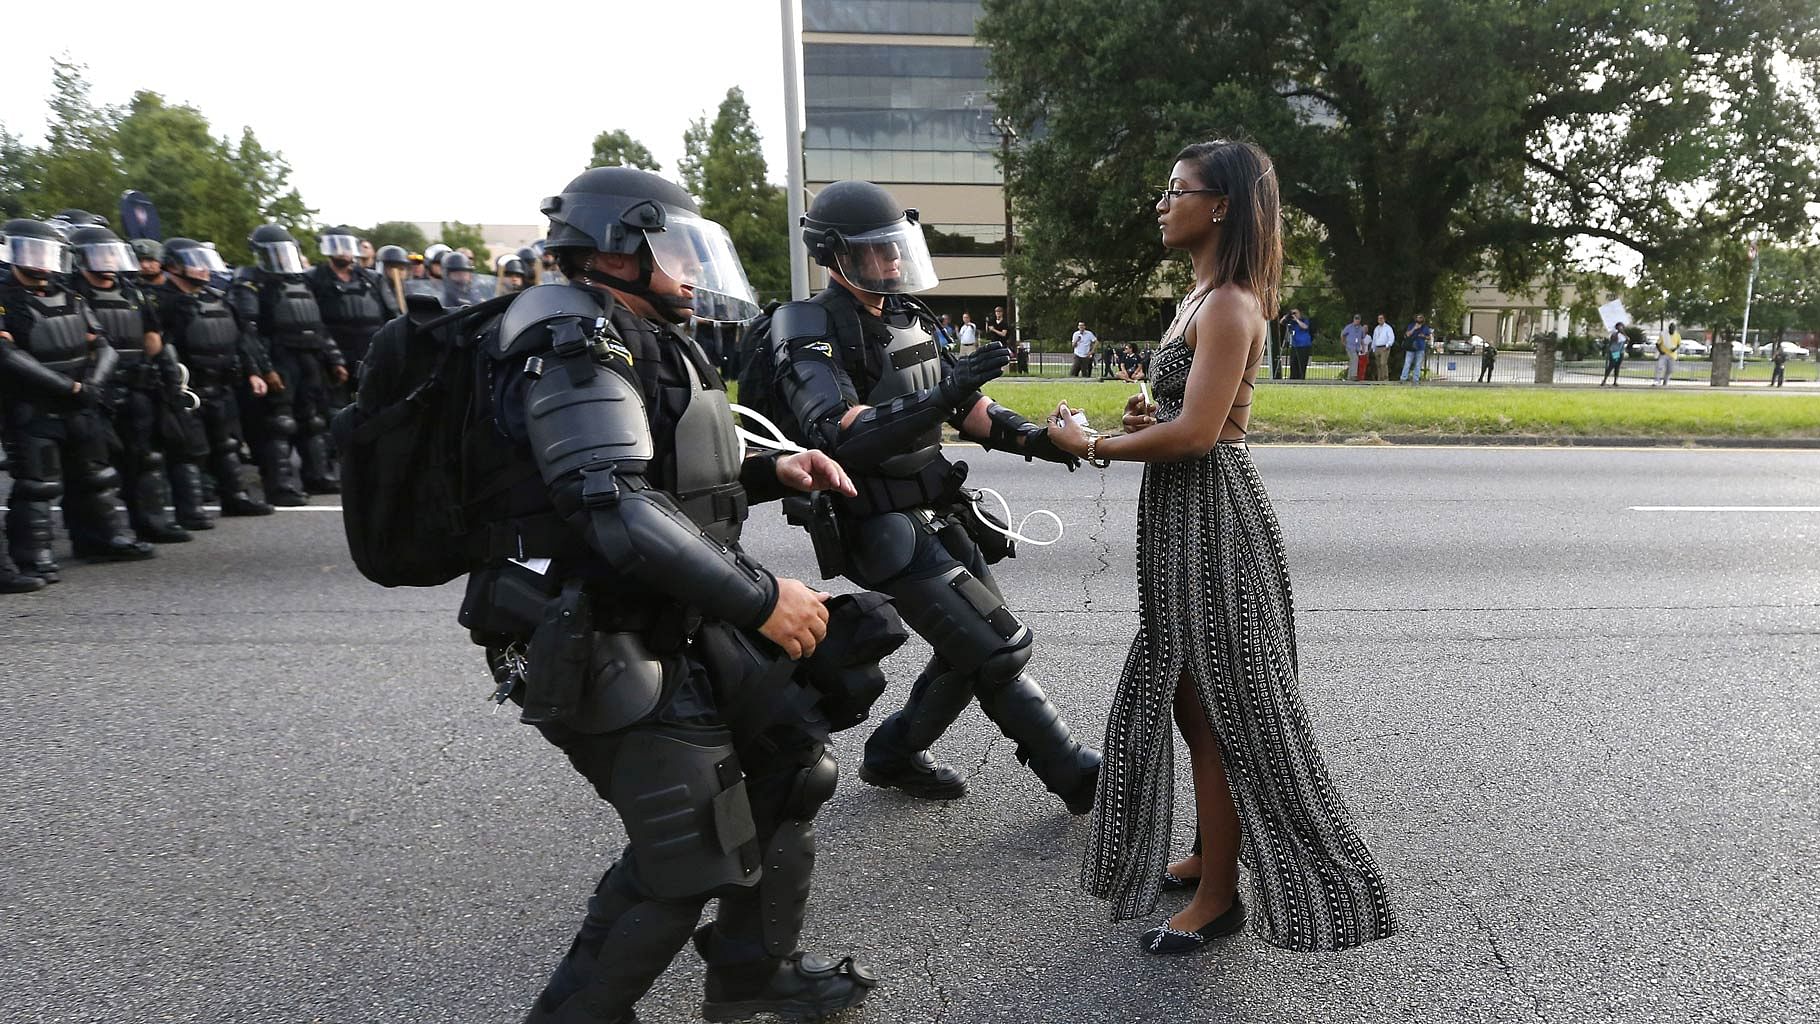 Leshia Evans, a demonstrator protesting the shooting death of Alton Sterling is detained by law enforcement near the headquarters of the Baton Rouge Police Department in Louisiana. (Photo: Reuters)